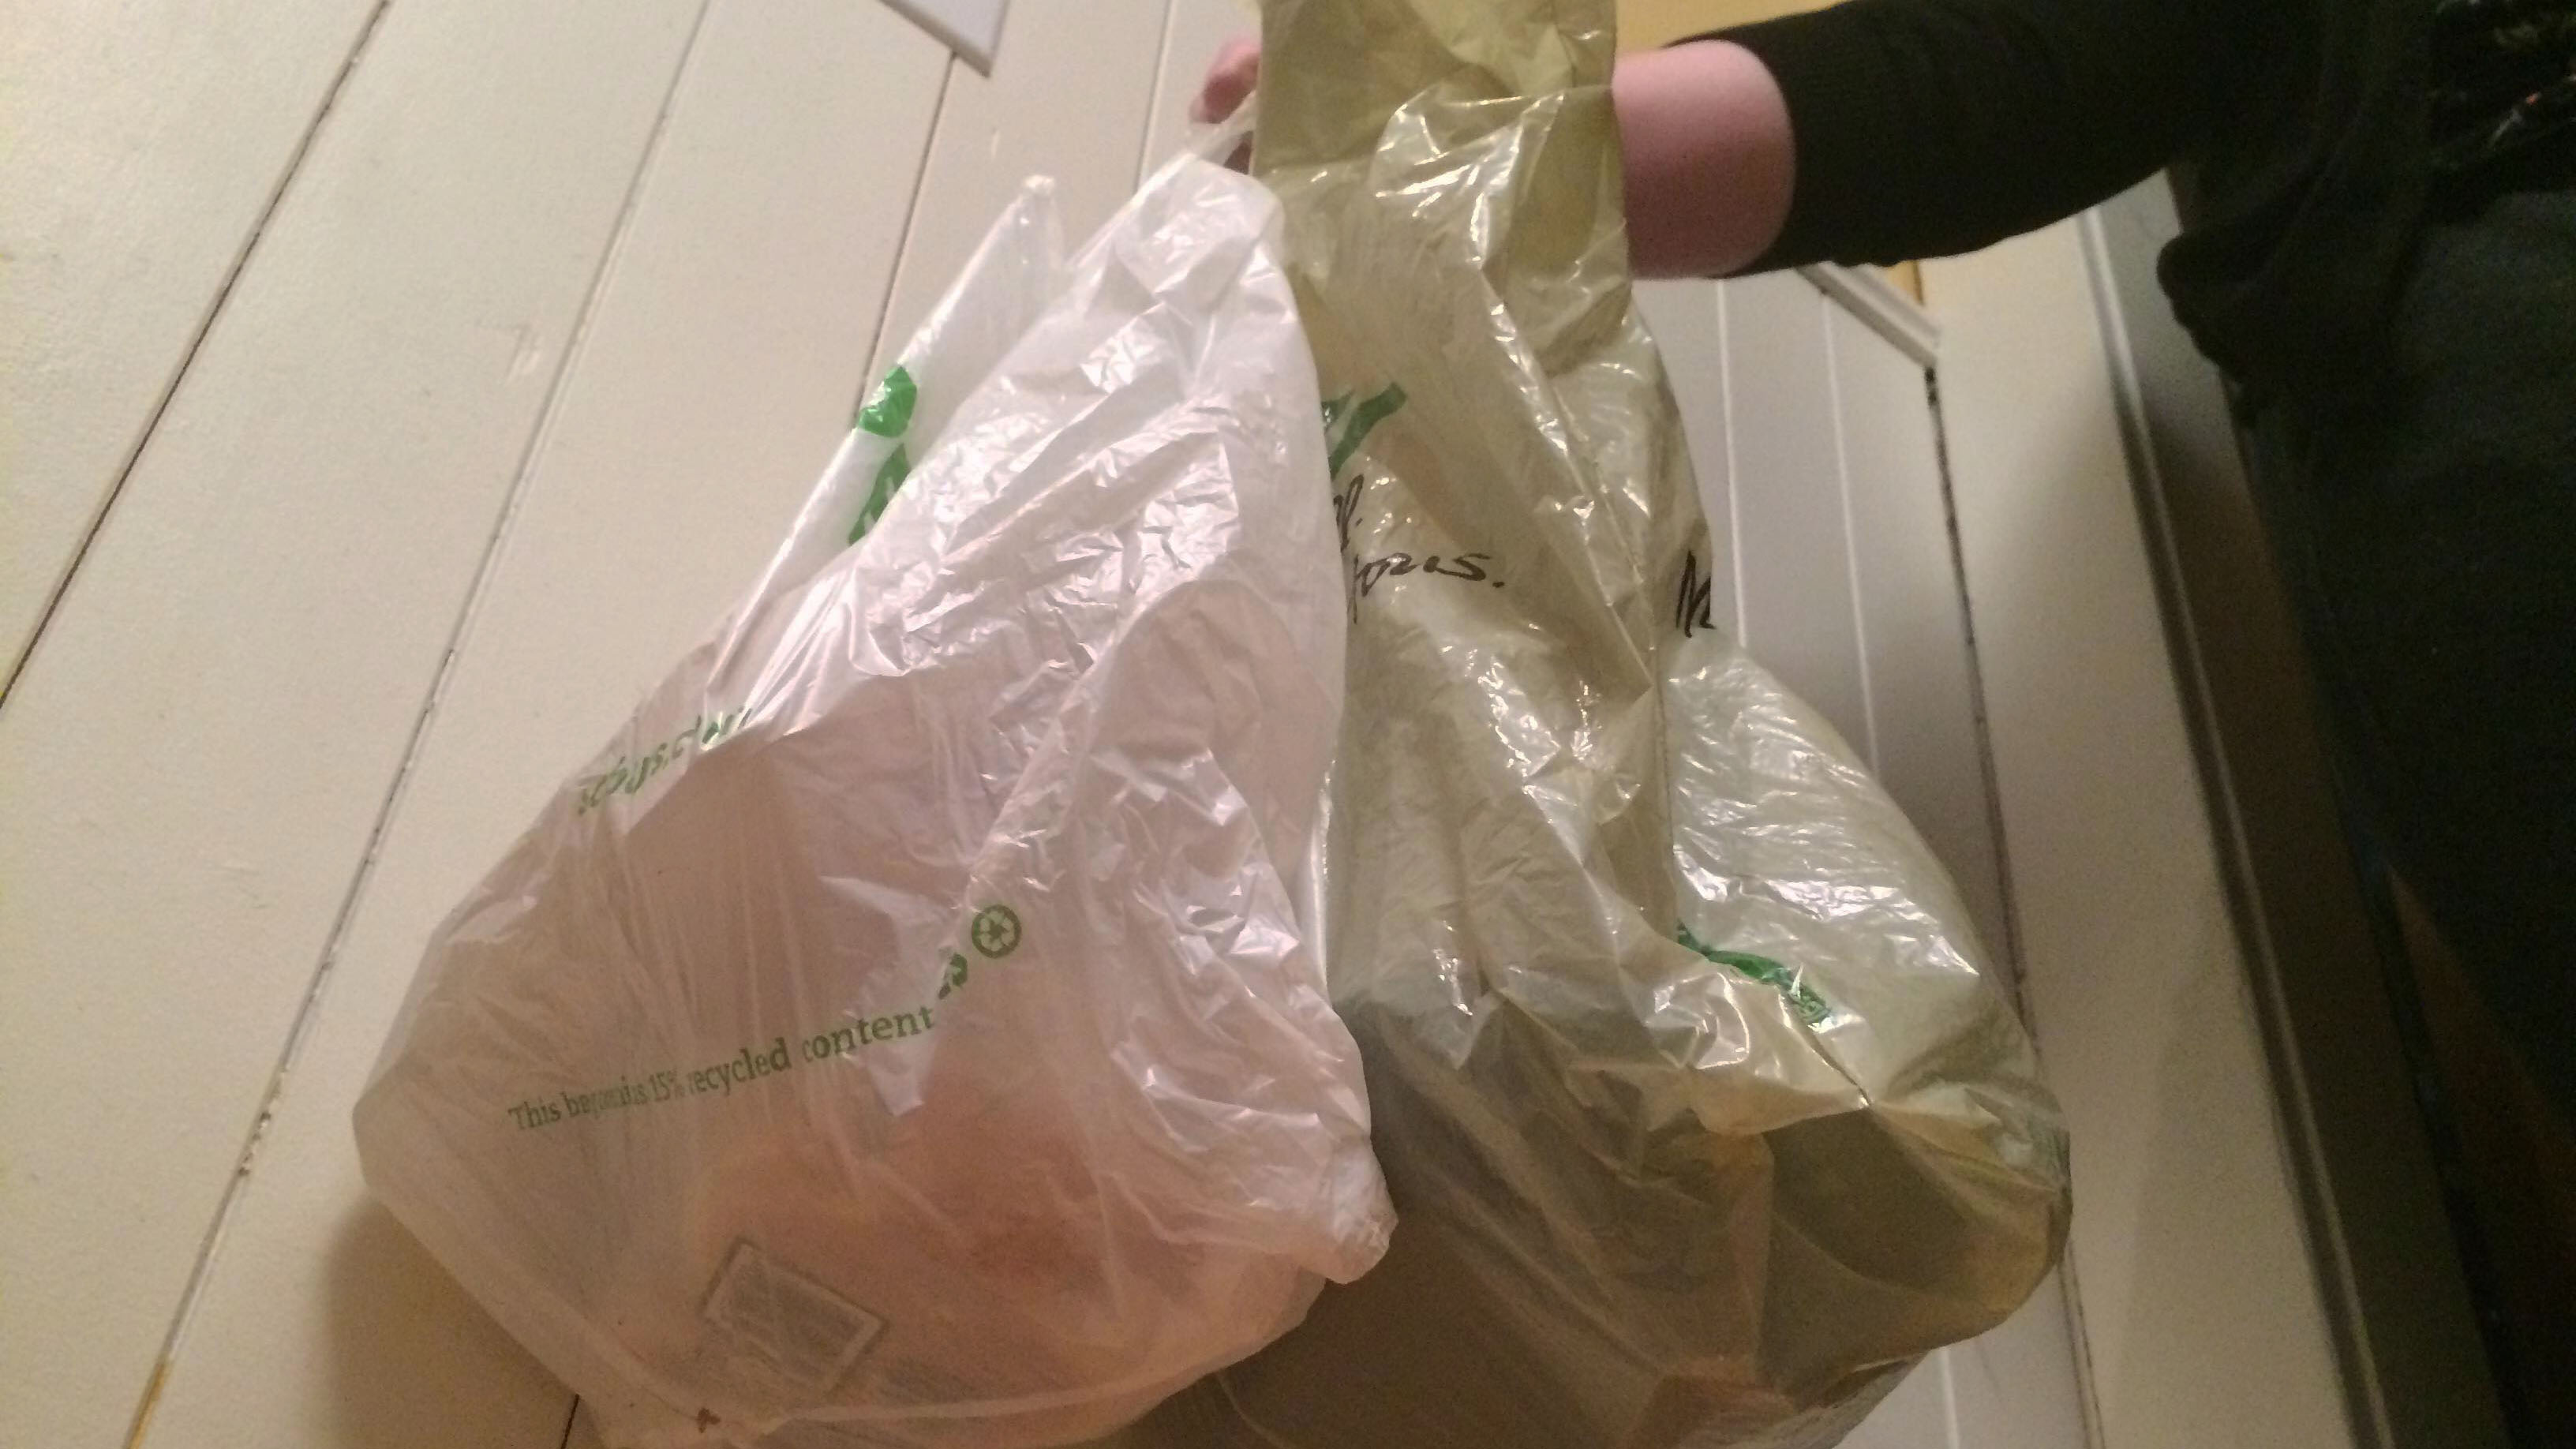 If a ban passes, plastic bags will no longer be available at stores in Halifax.